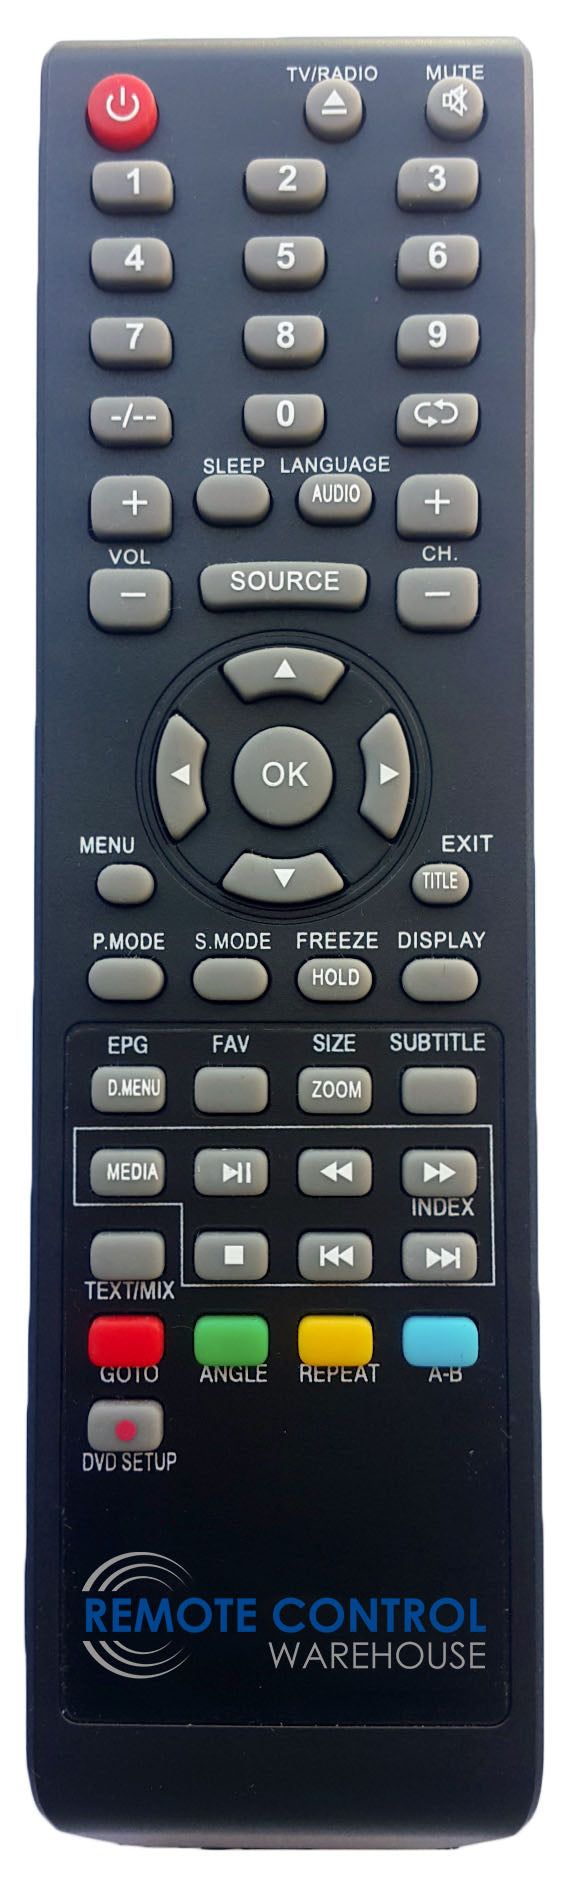 REPLACEMENT BAUHN REMOTE CONTROL SUBSTITUTE  ATV50F-415  ATV50F415  LCD TV - Remote Control Warehouse